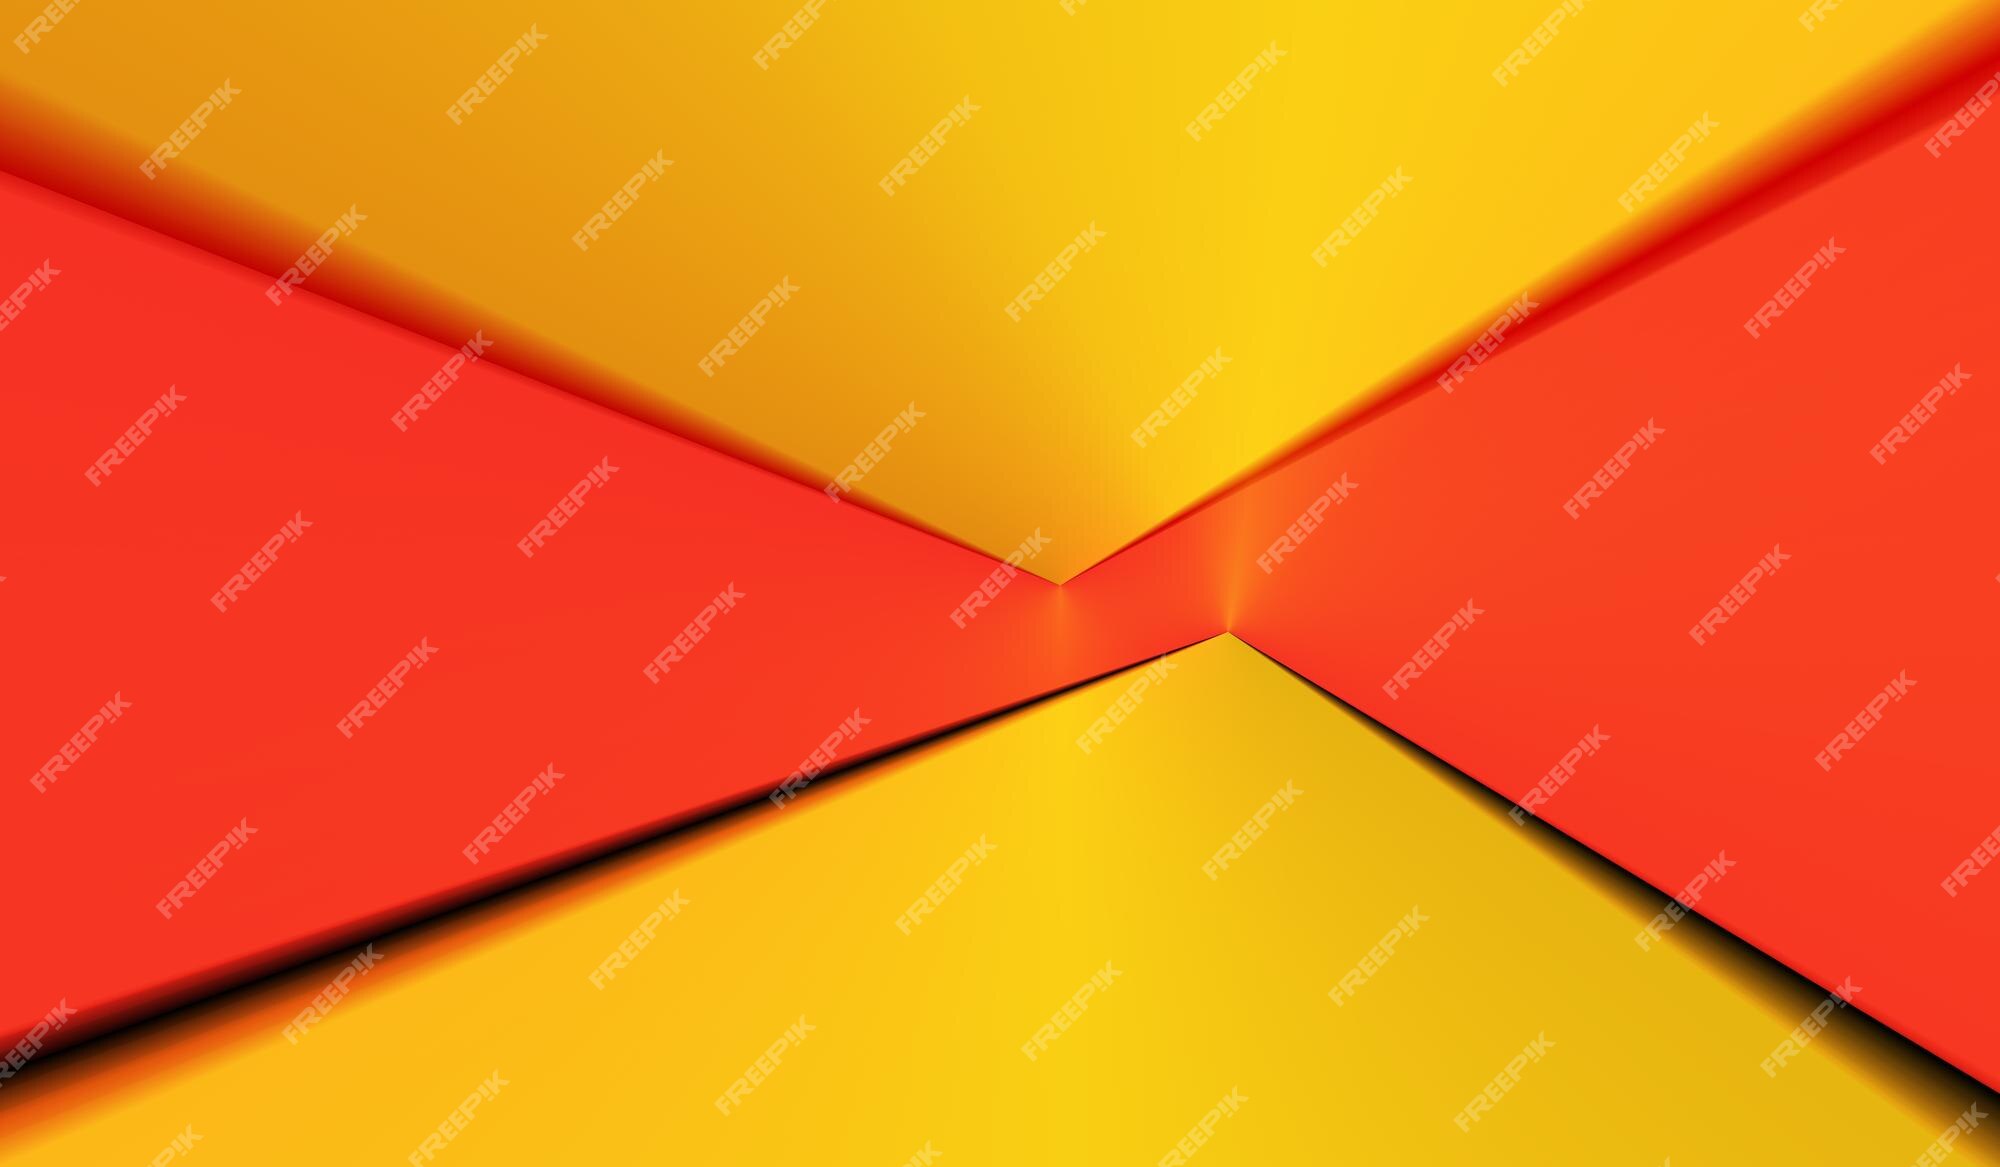 Red And Yellow Background Images - Free Download on Freepik